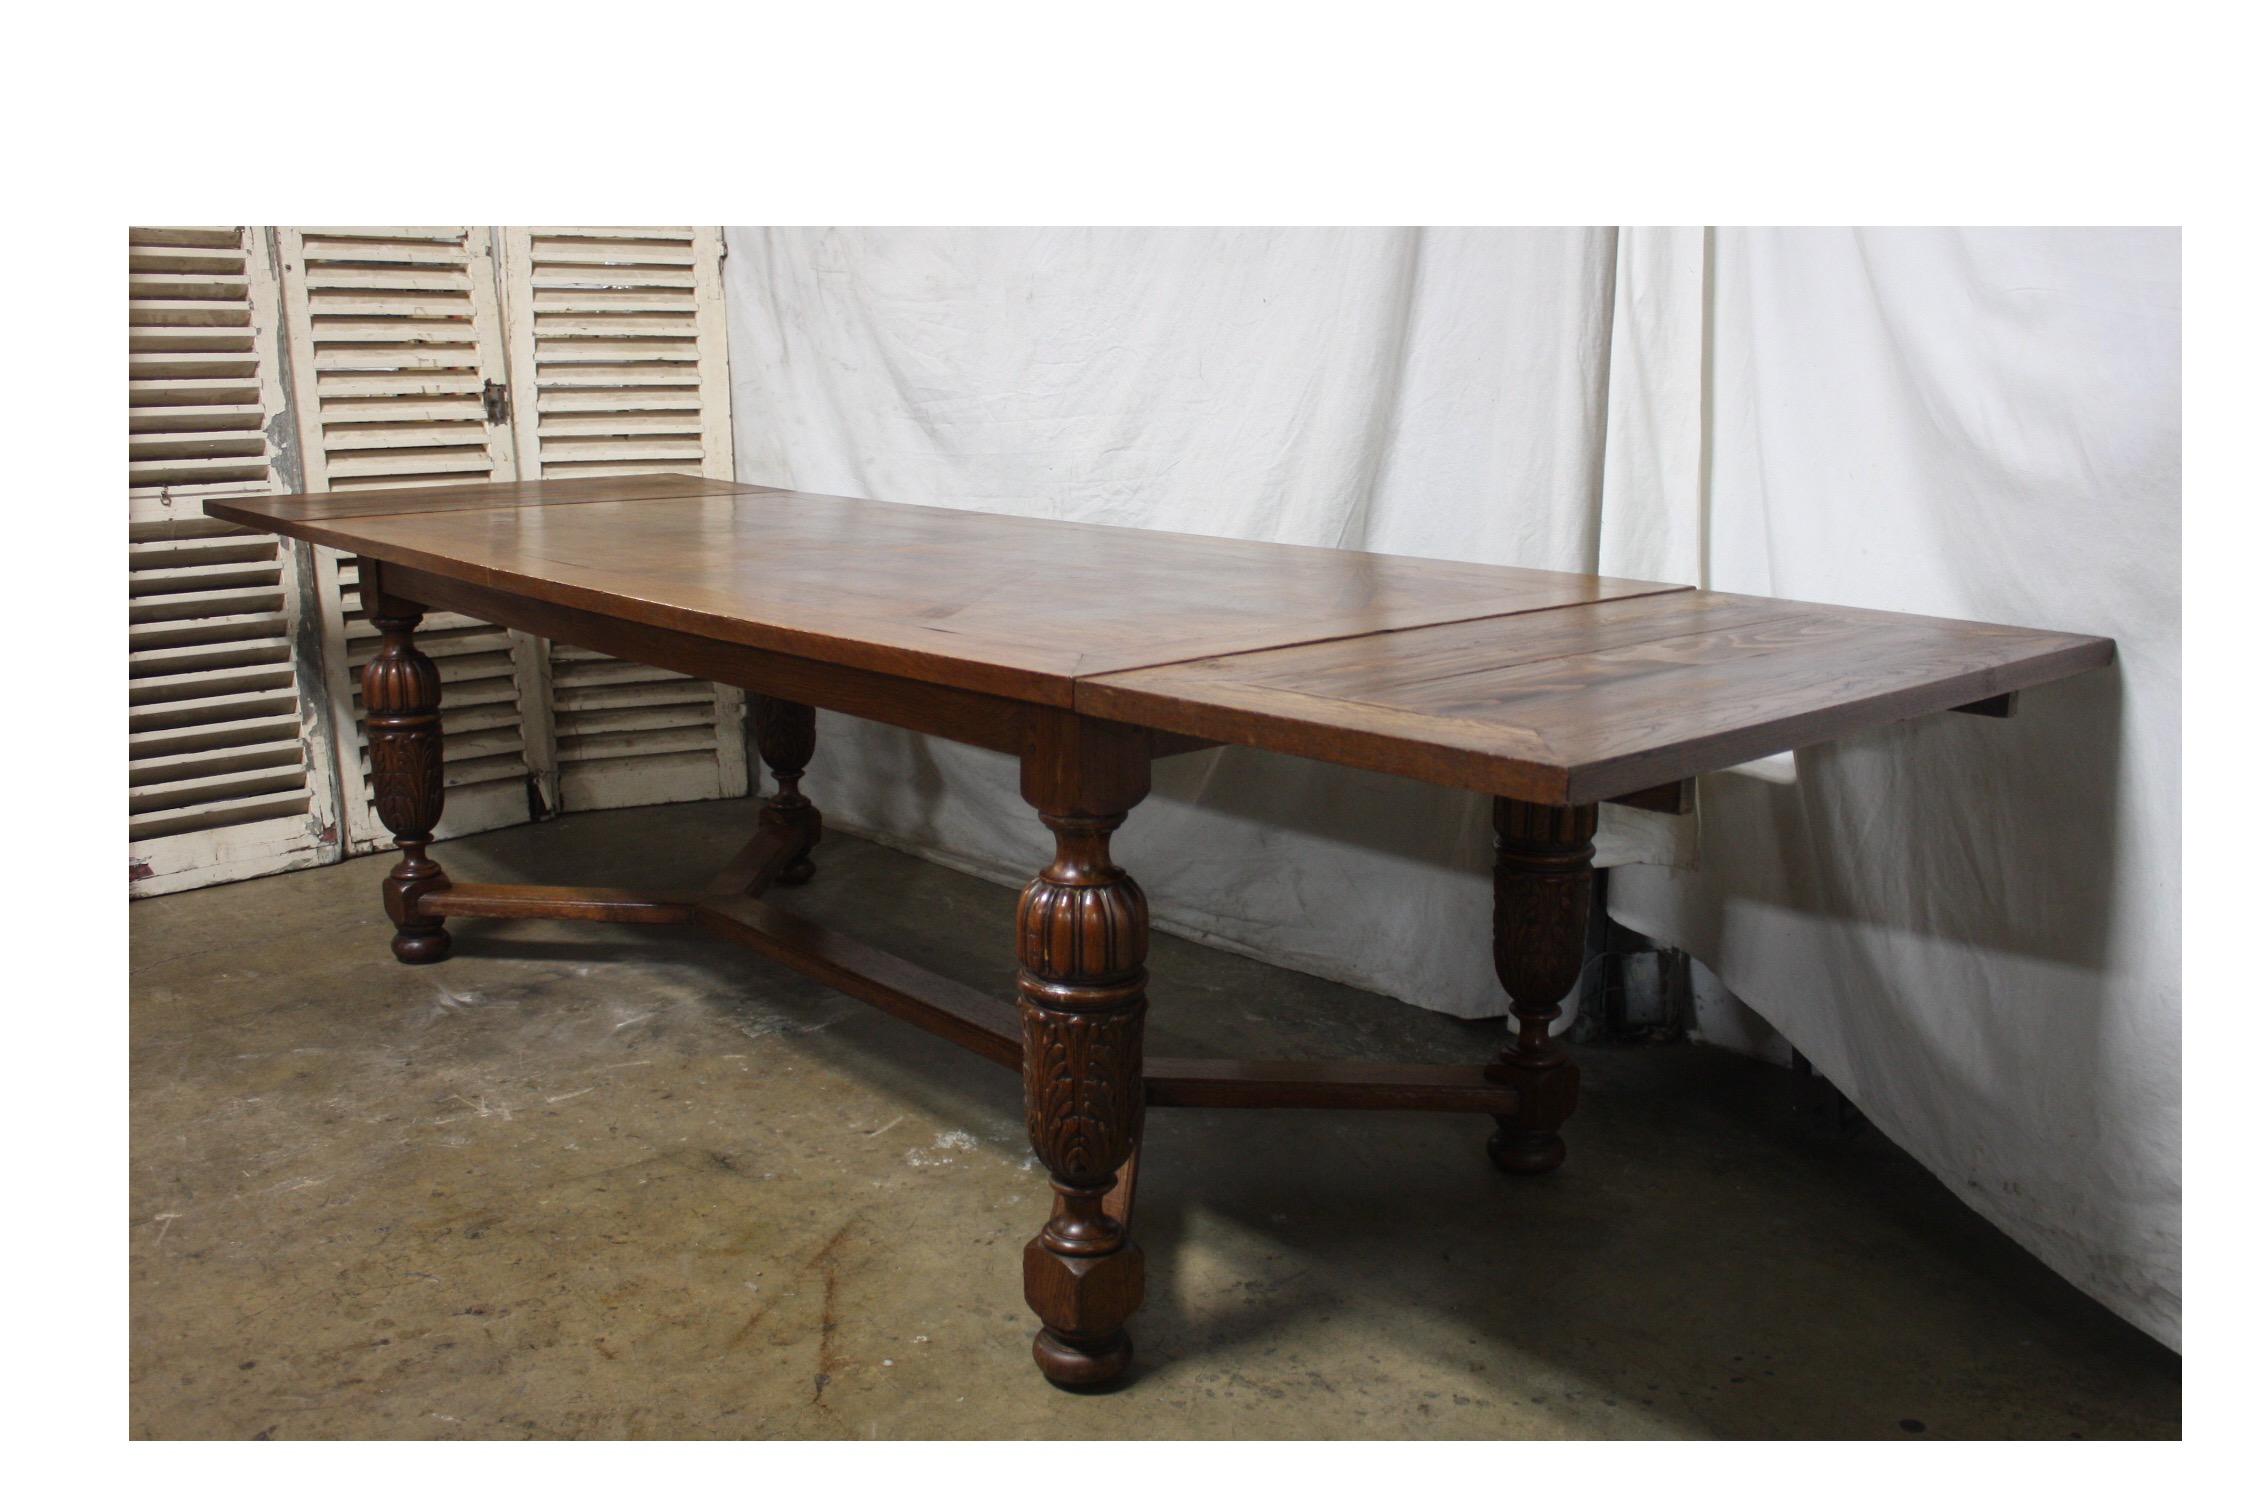 French 19th century dining table
Dimensions without the 2 extensions are 76.6in W x 39.25in D x 29.5in H
With the 2 extensions 118in W.